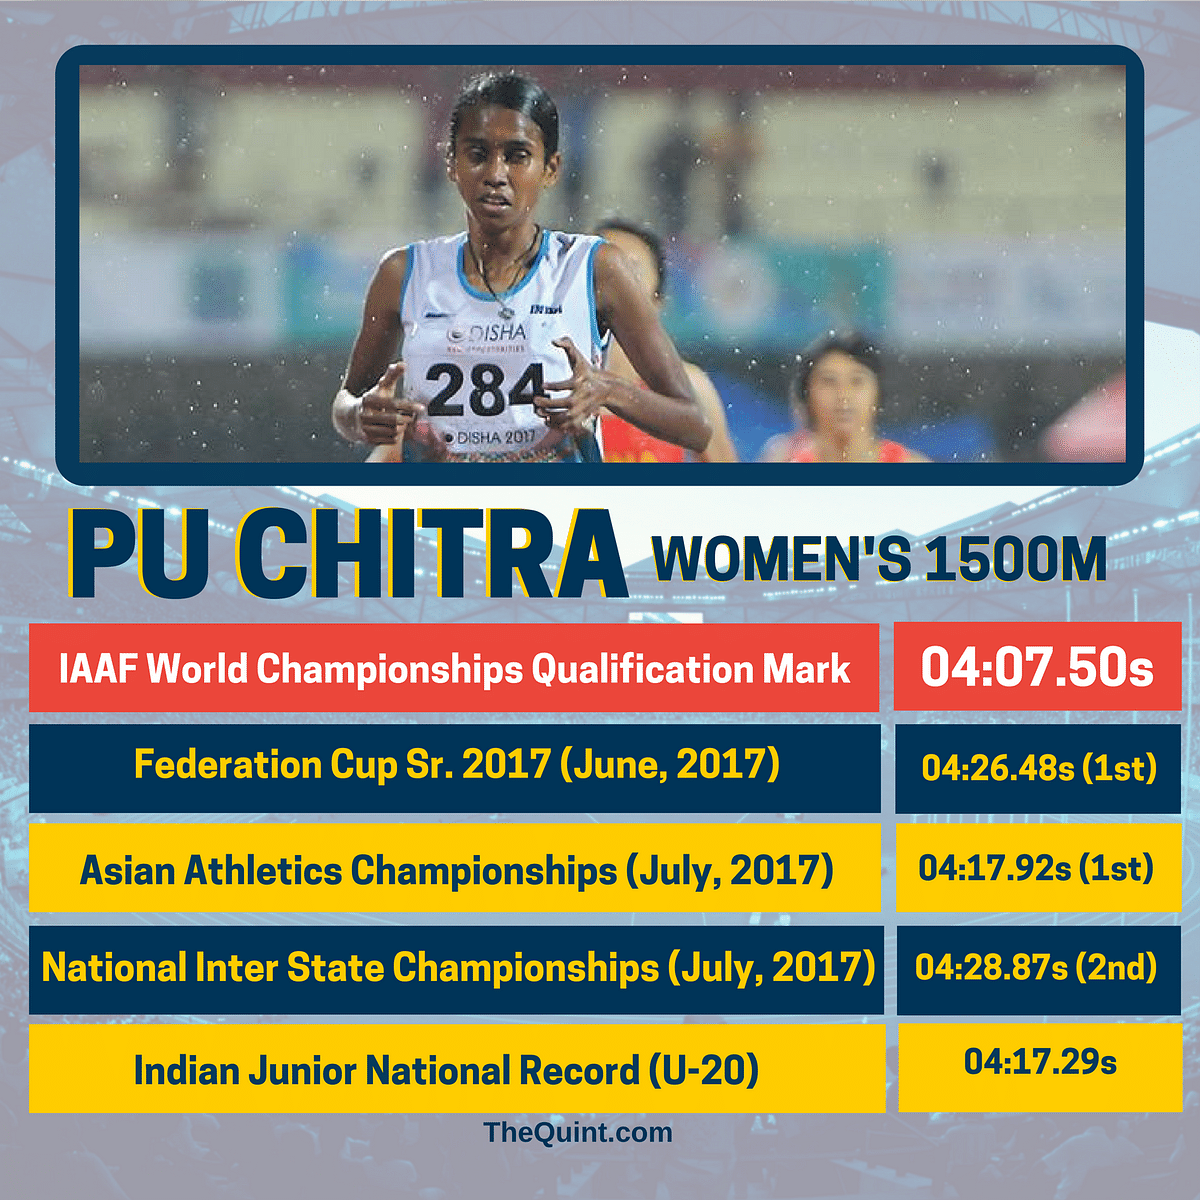 Three athletes were dropped from the squad despite qualifying. Dutee Chand was included despite not making the cut.